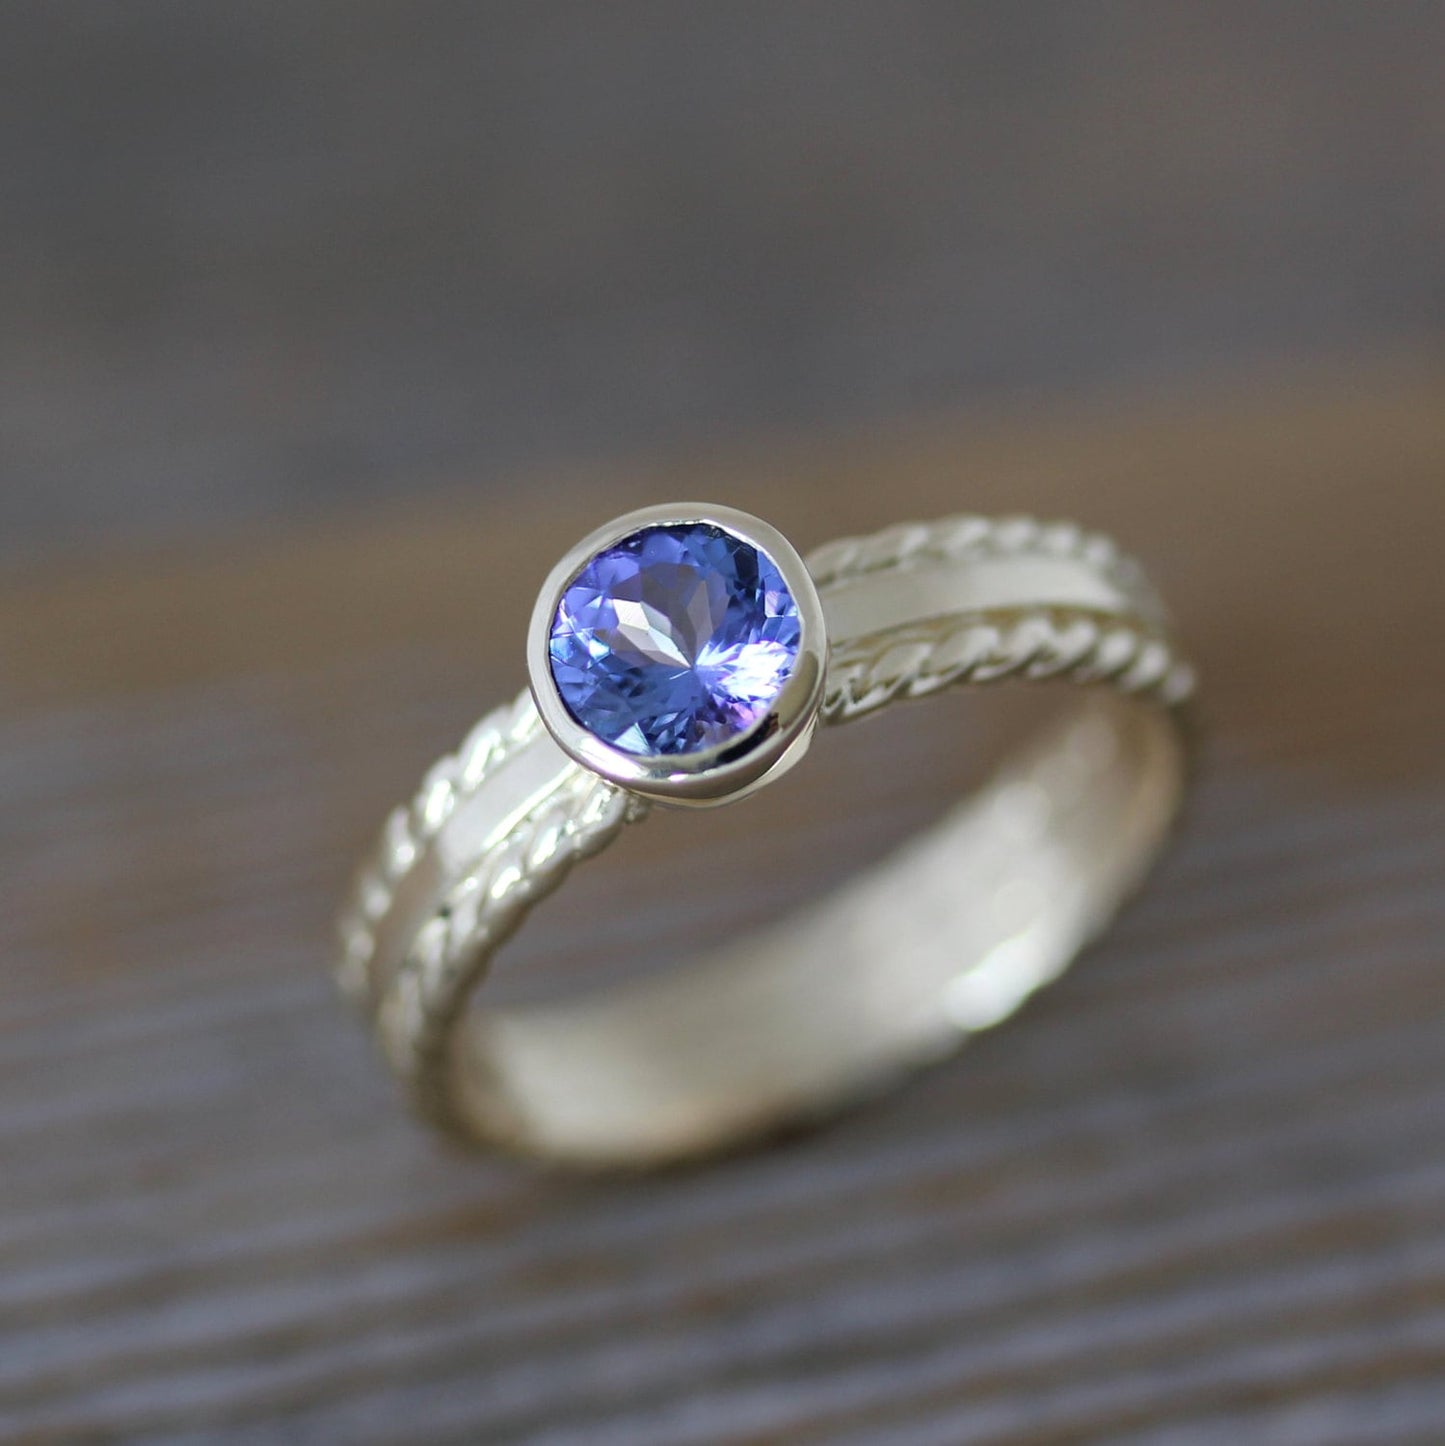 Handmade Royal Blue Tanzanite and 14k Yellow Gold Gemstone Ring from Cassin Jewelry Collection.